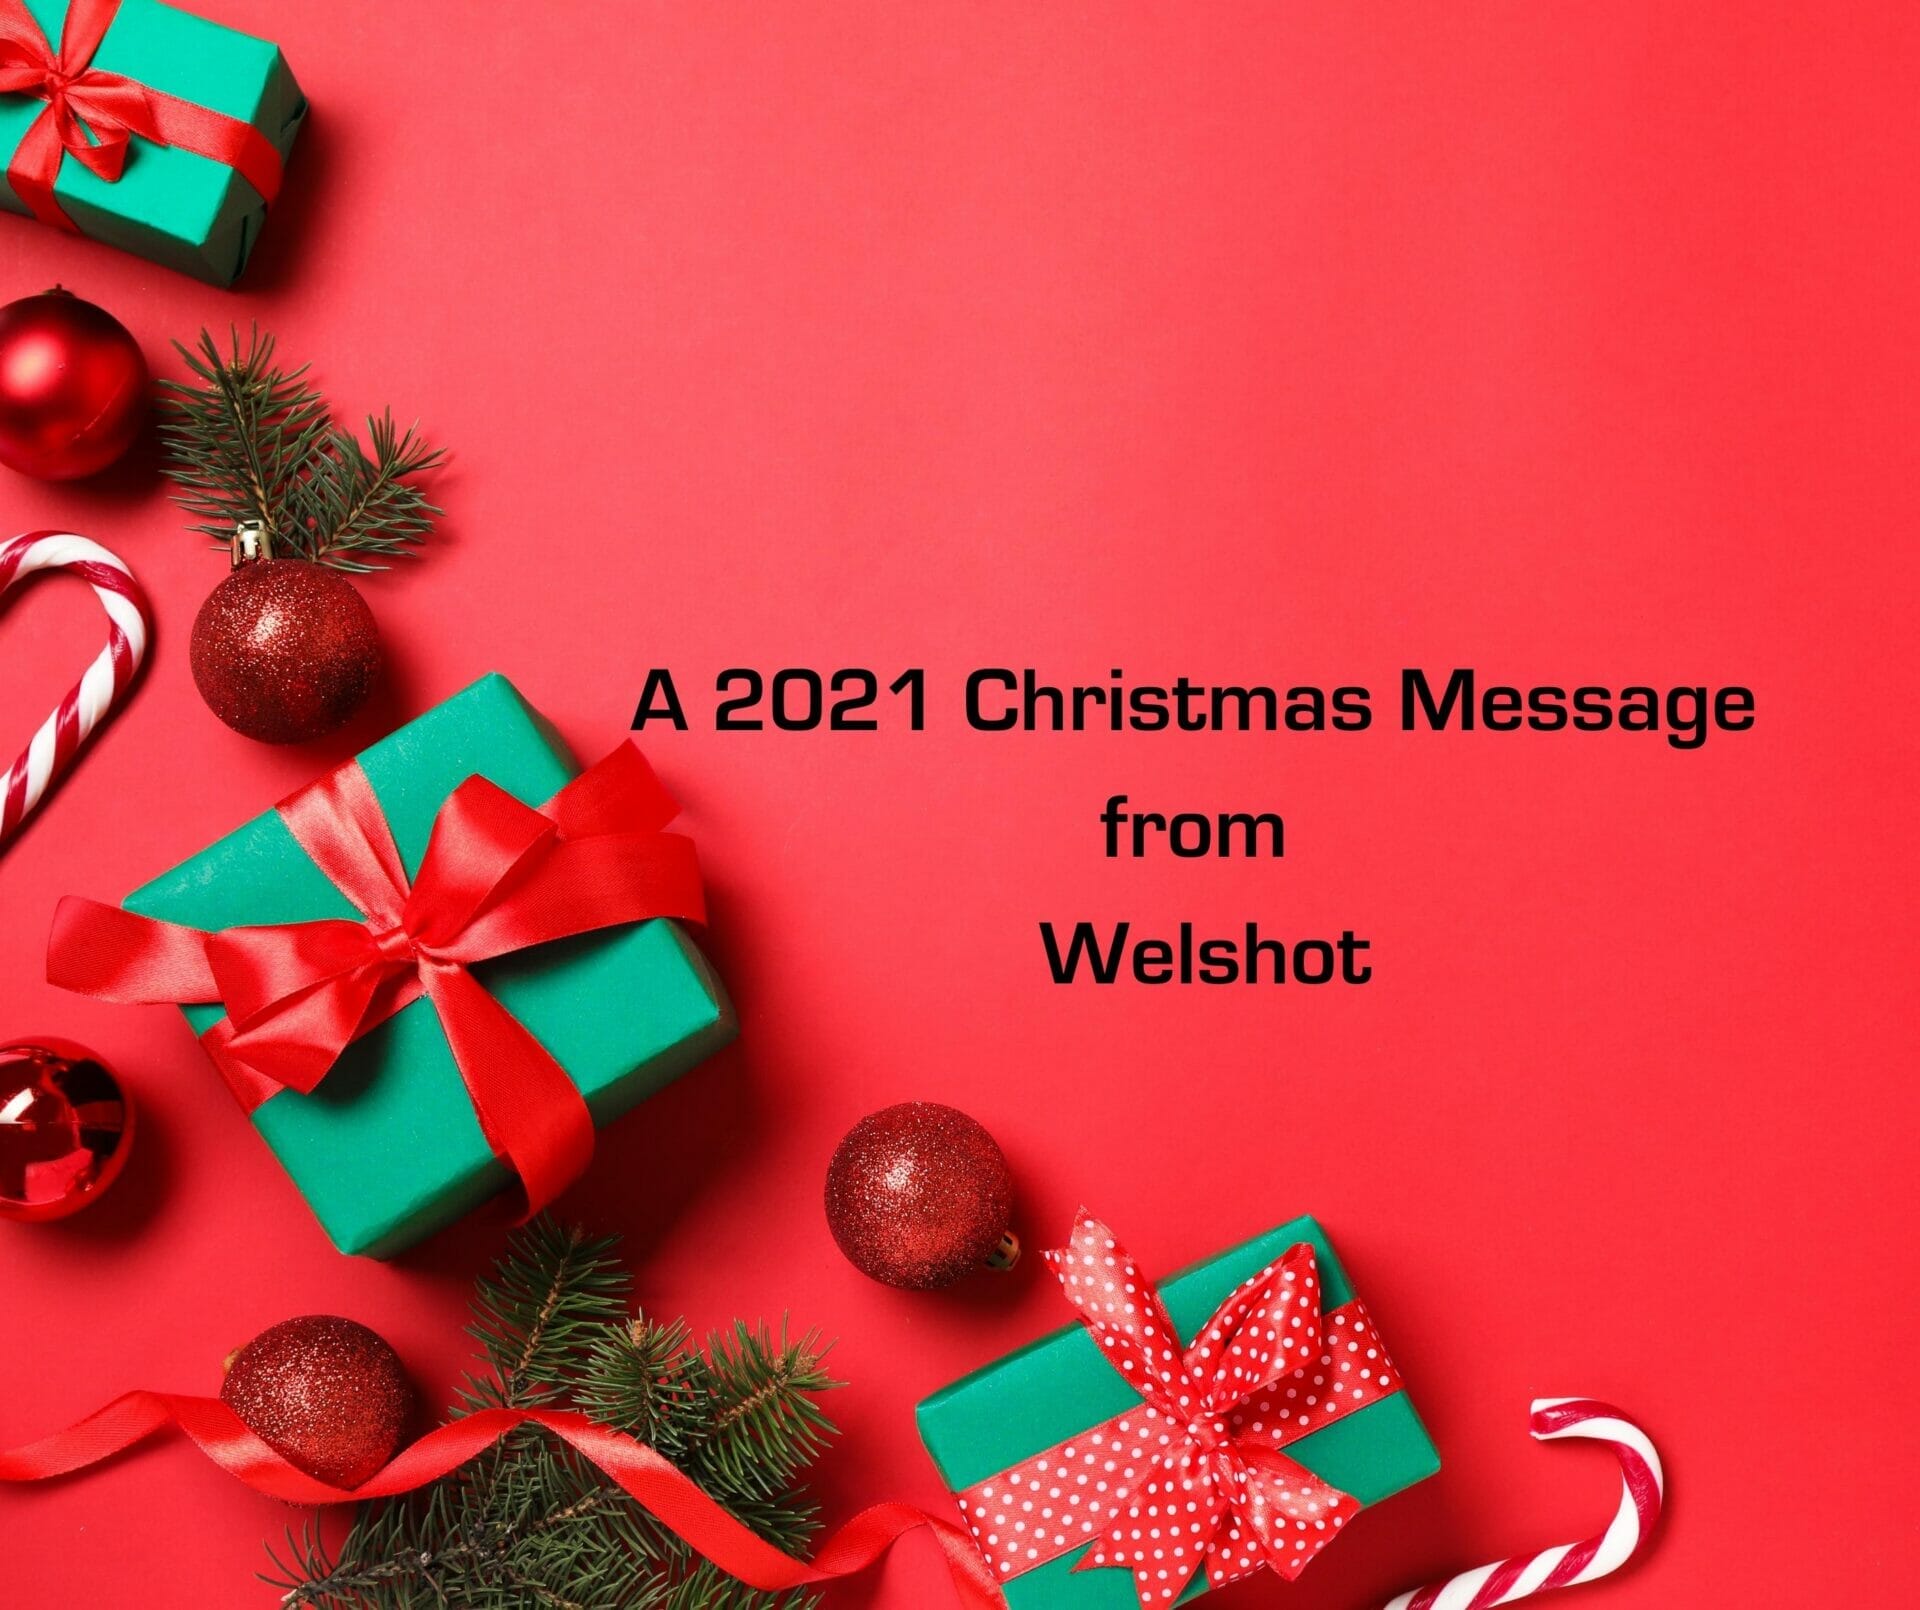 Thank YOU - A Christmas Message from the Welshot Photographic Academy